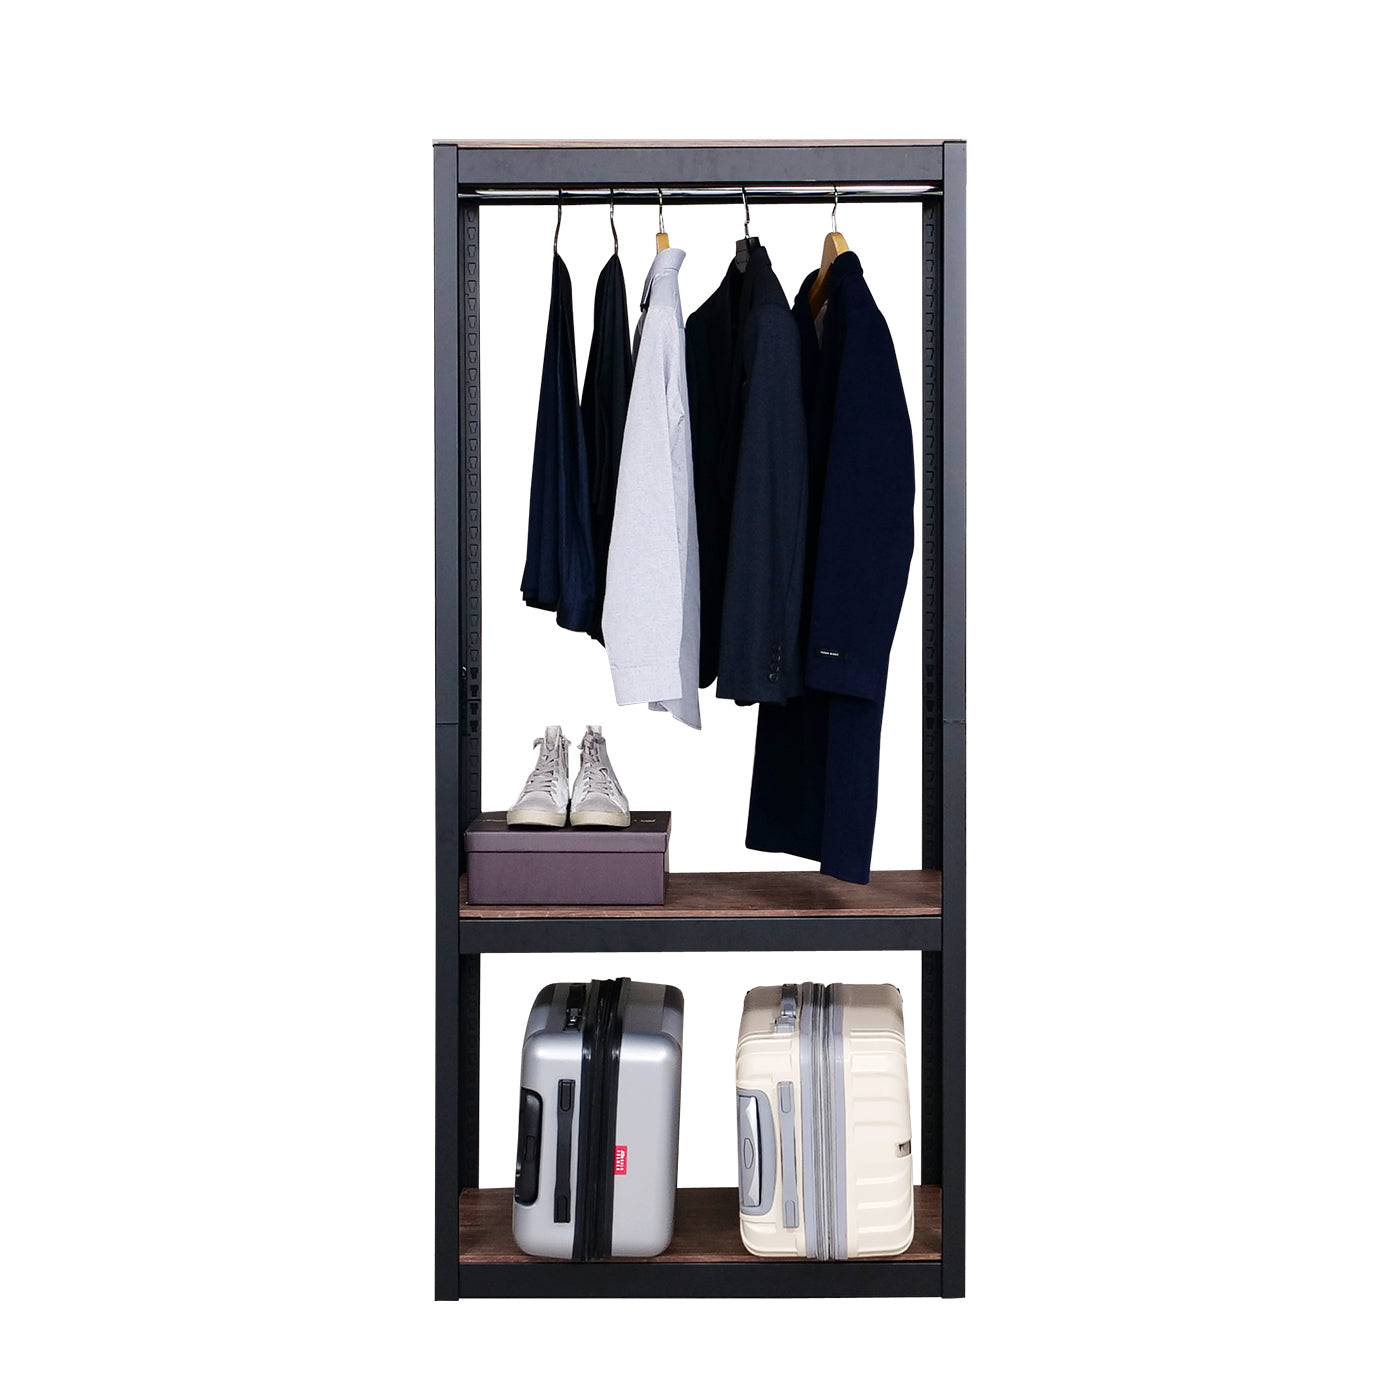 The Classic Clothing Rack with Shelf in Black